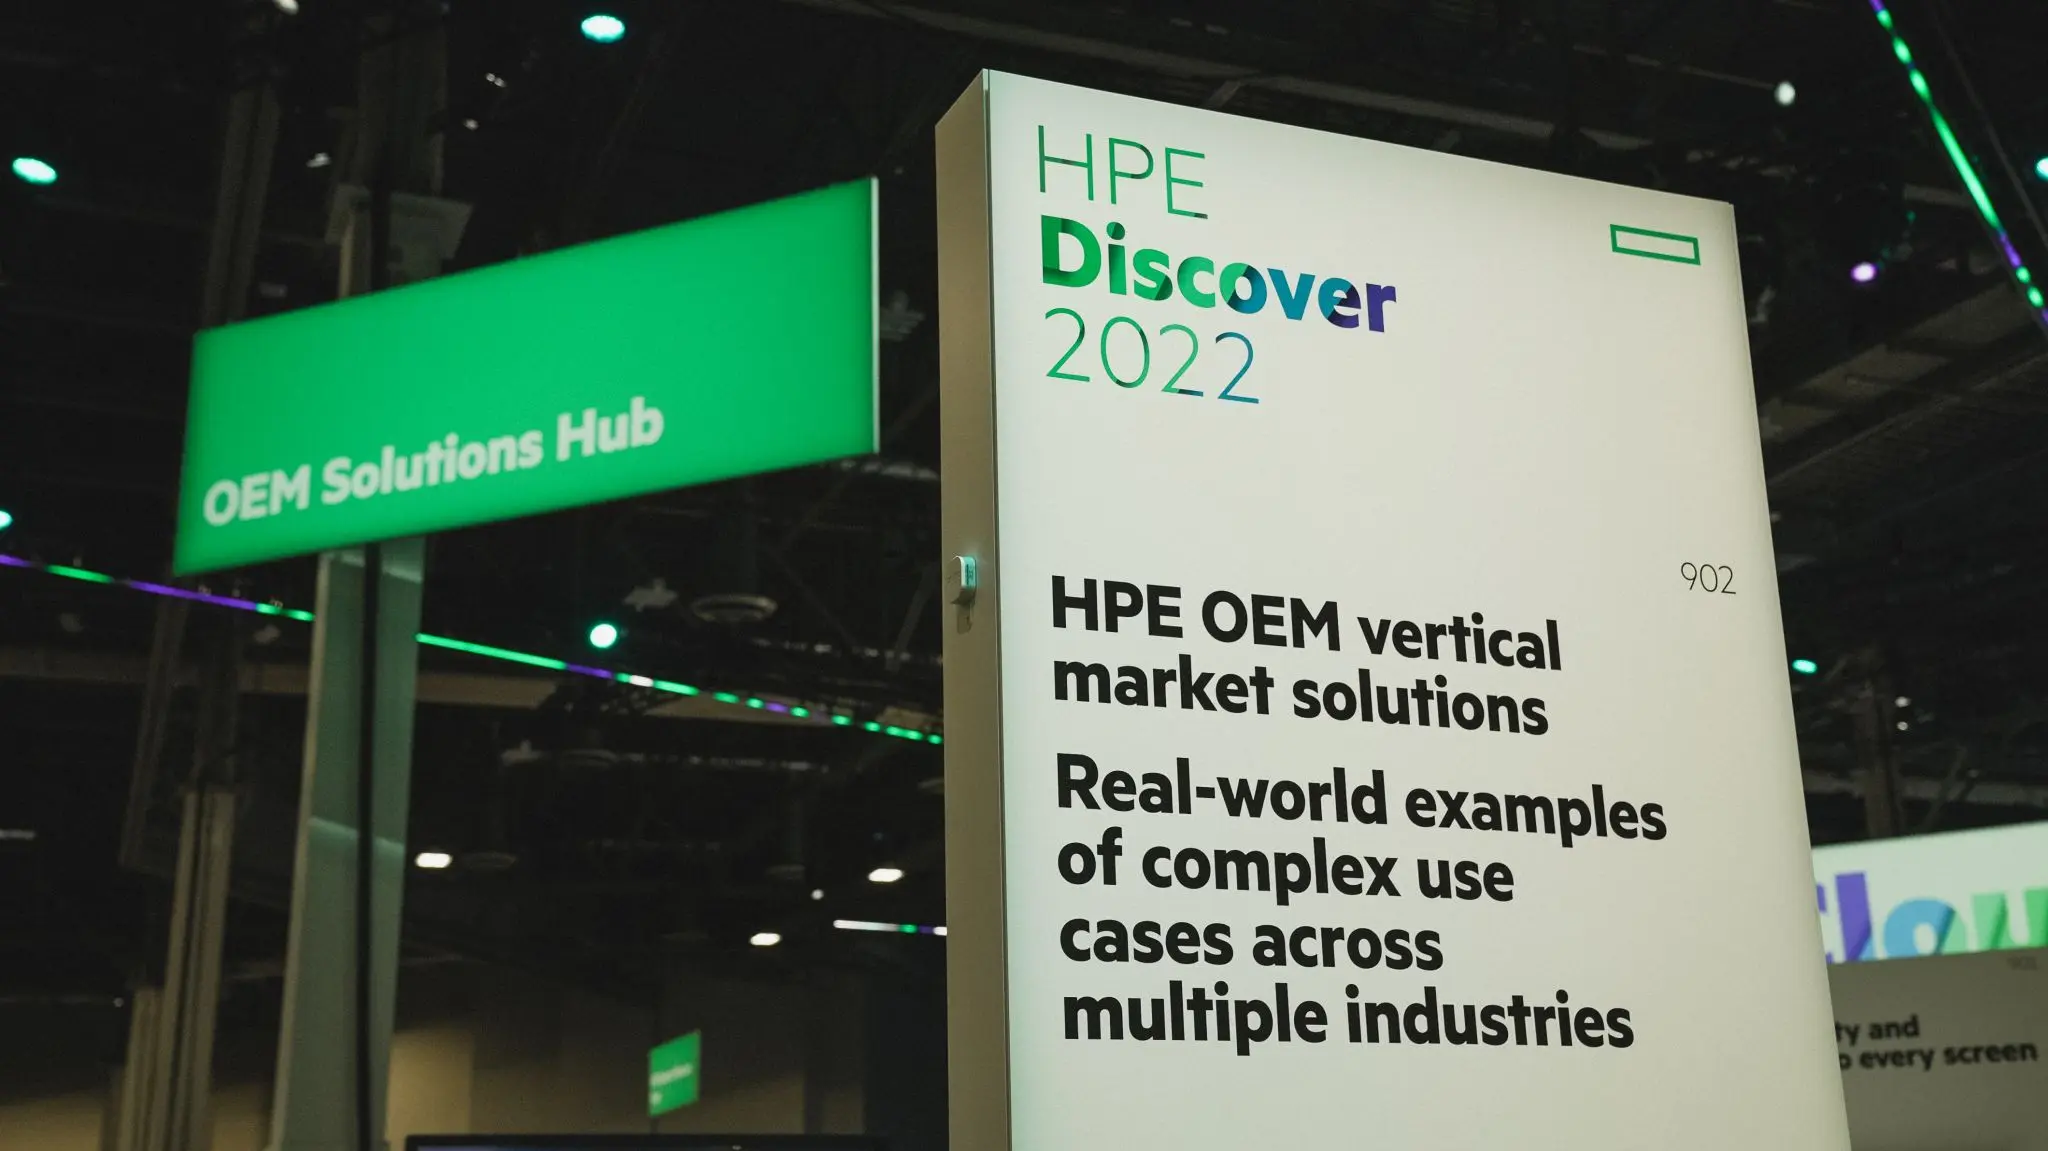 hewlett packard enterprise events - What is the HPE Partner event 2023